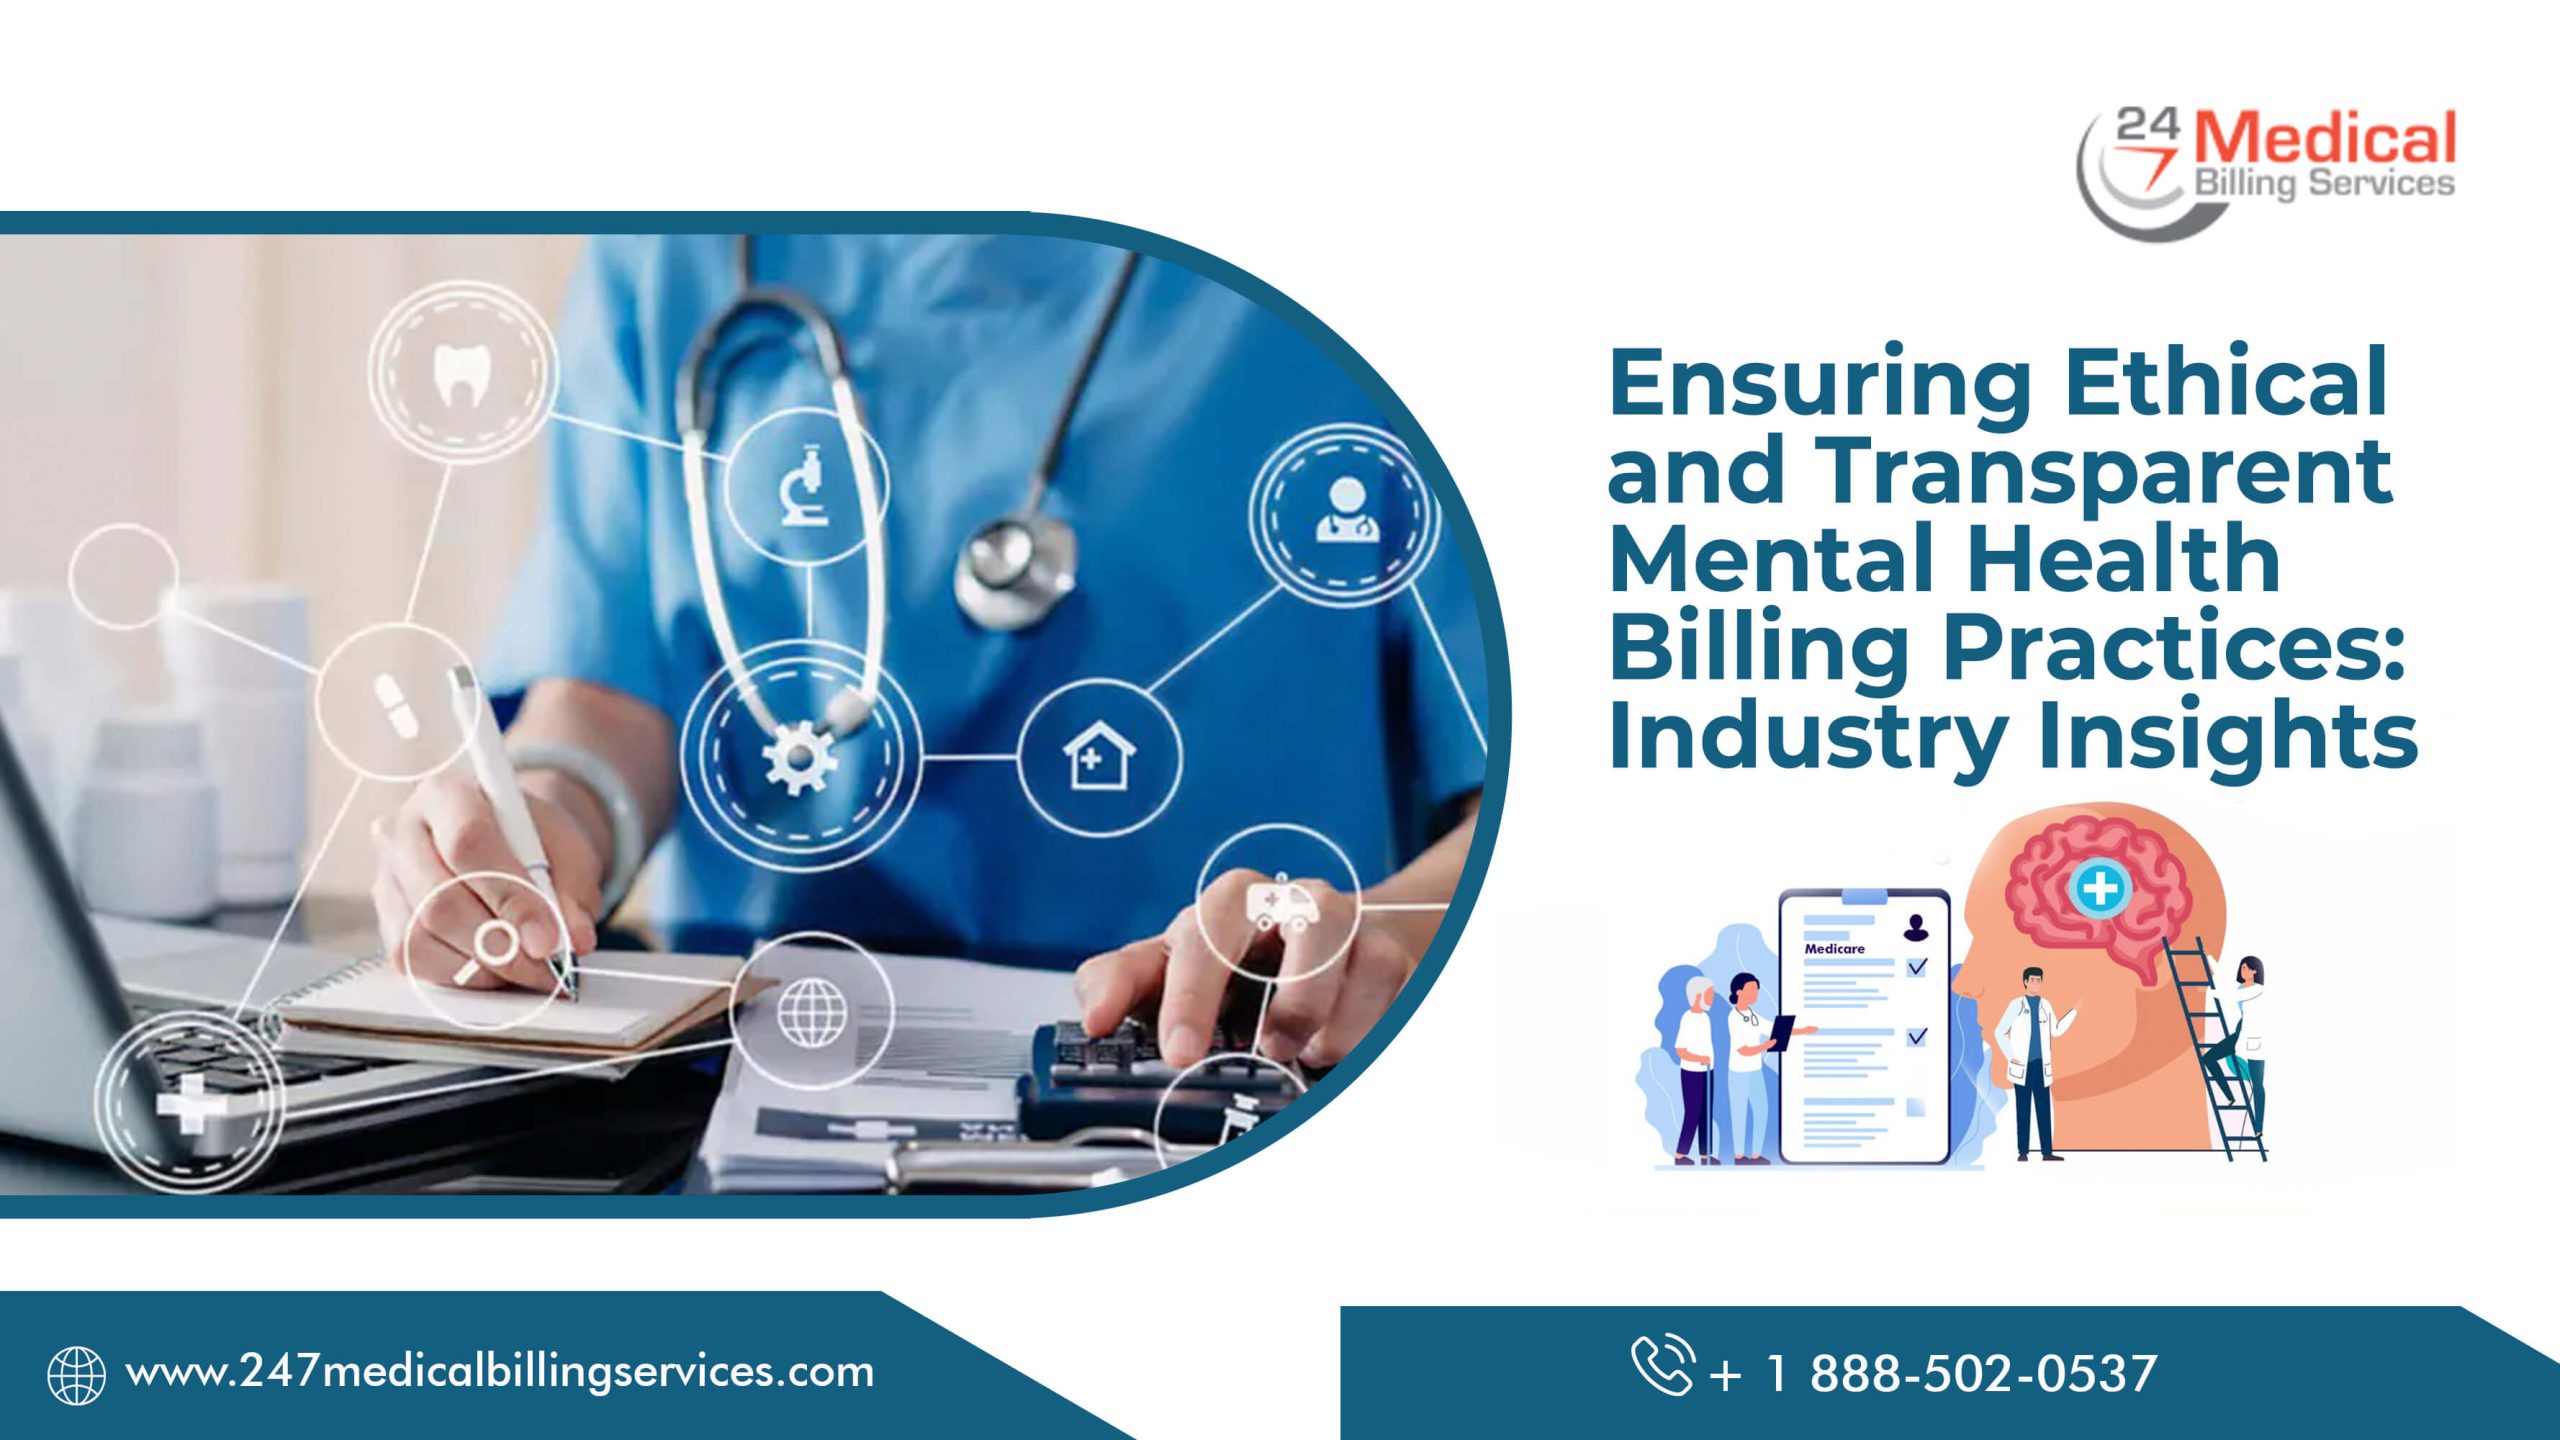 Ensuring Ethical and Transparent Mental Health Billing Practices: Industry Insights - 24/7 Medical Billing Services